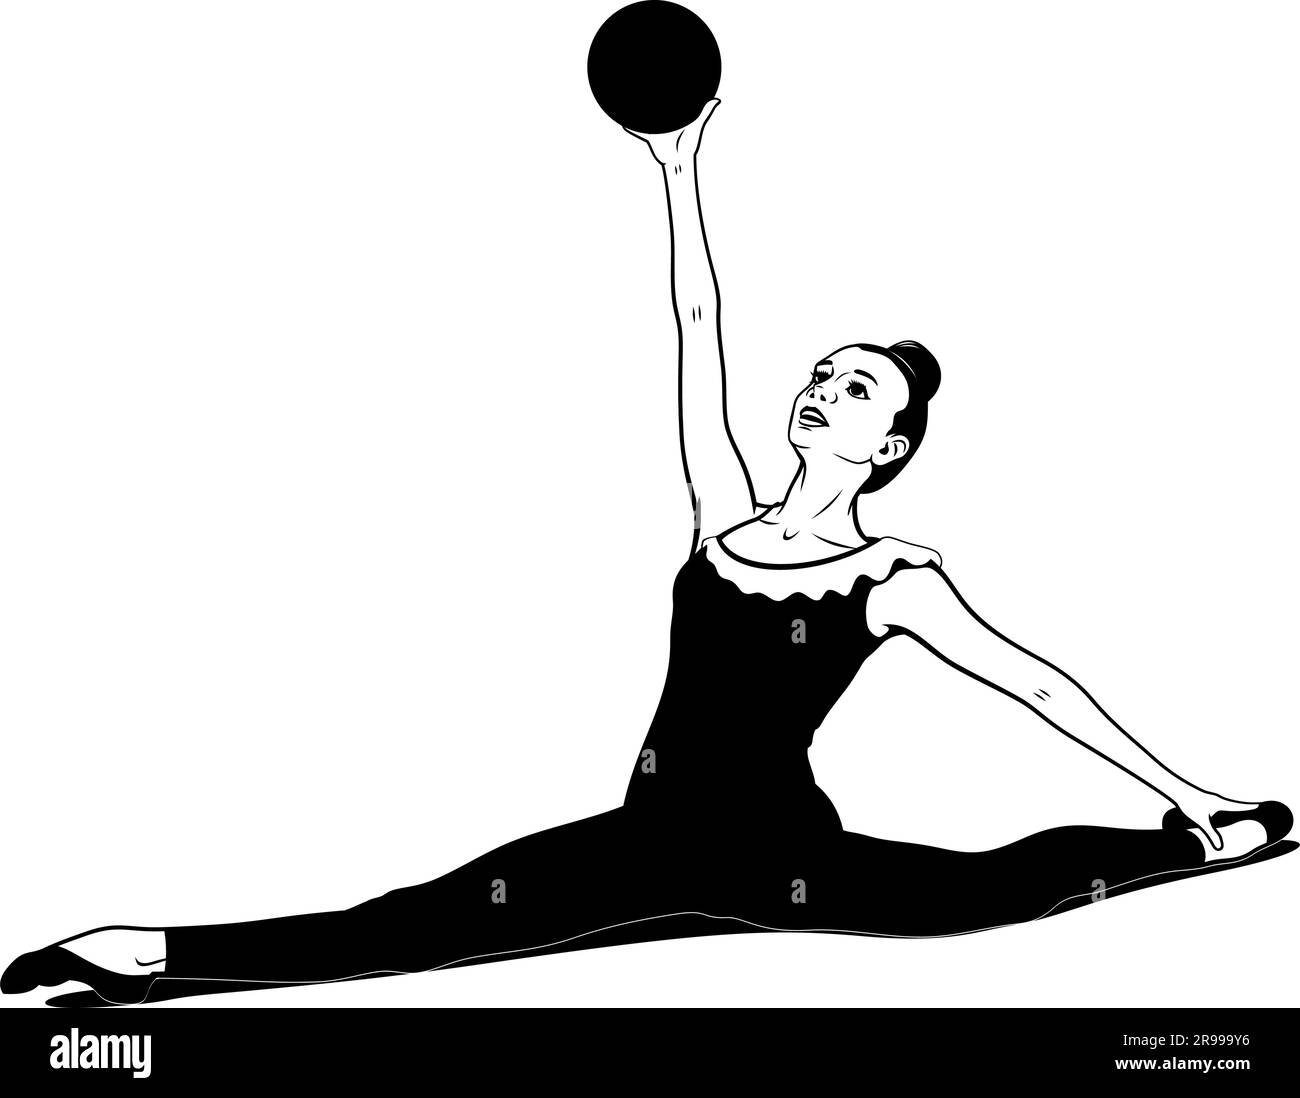 Silhouette of female rhythmic gymnast player with ribbon. Vector